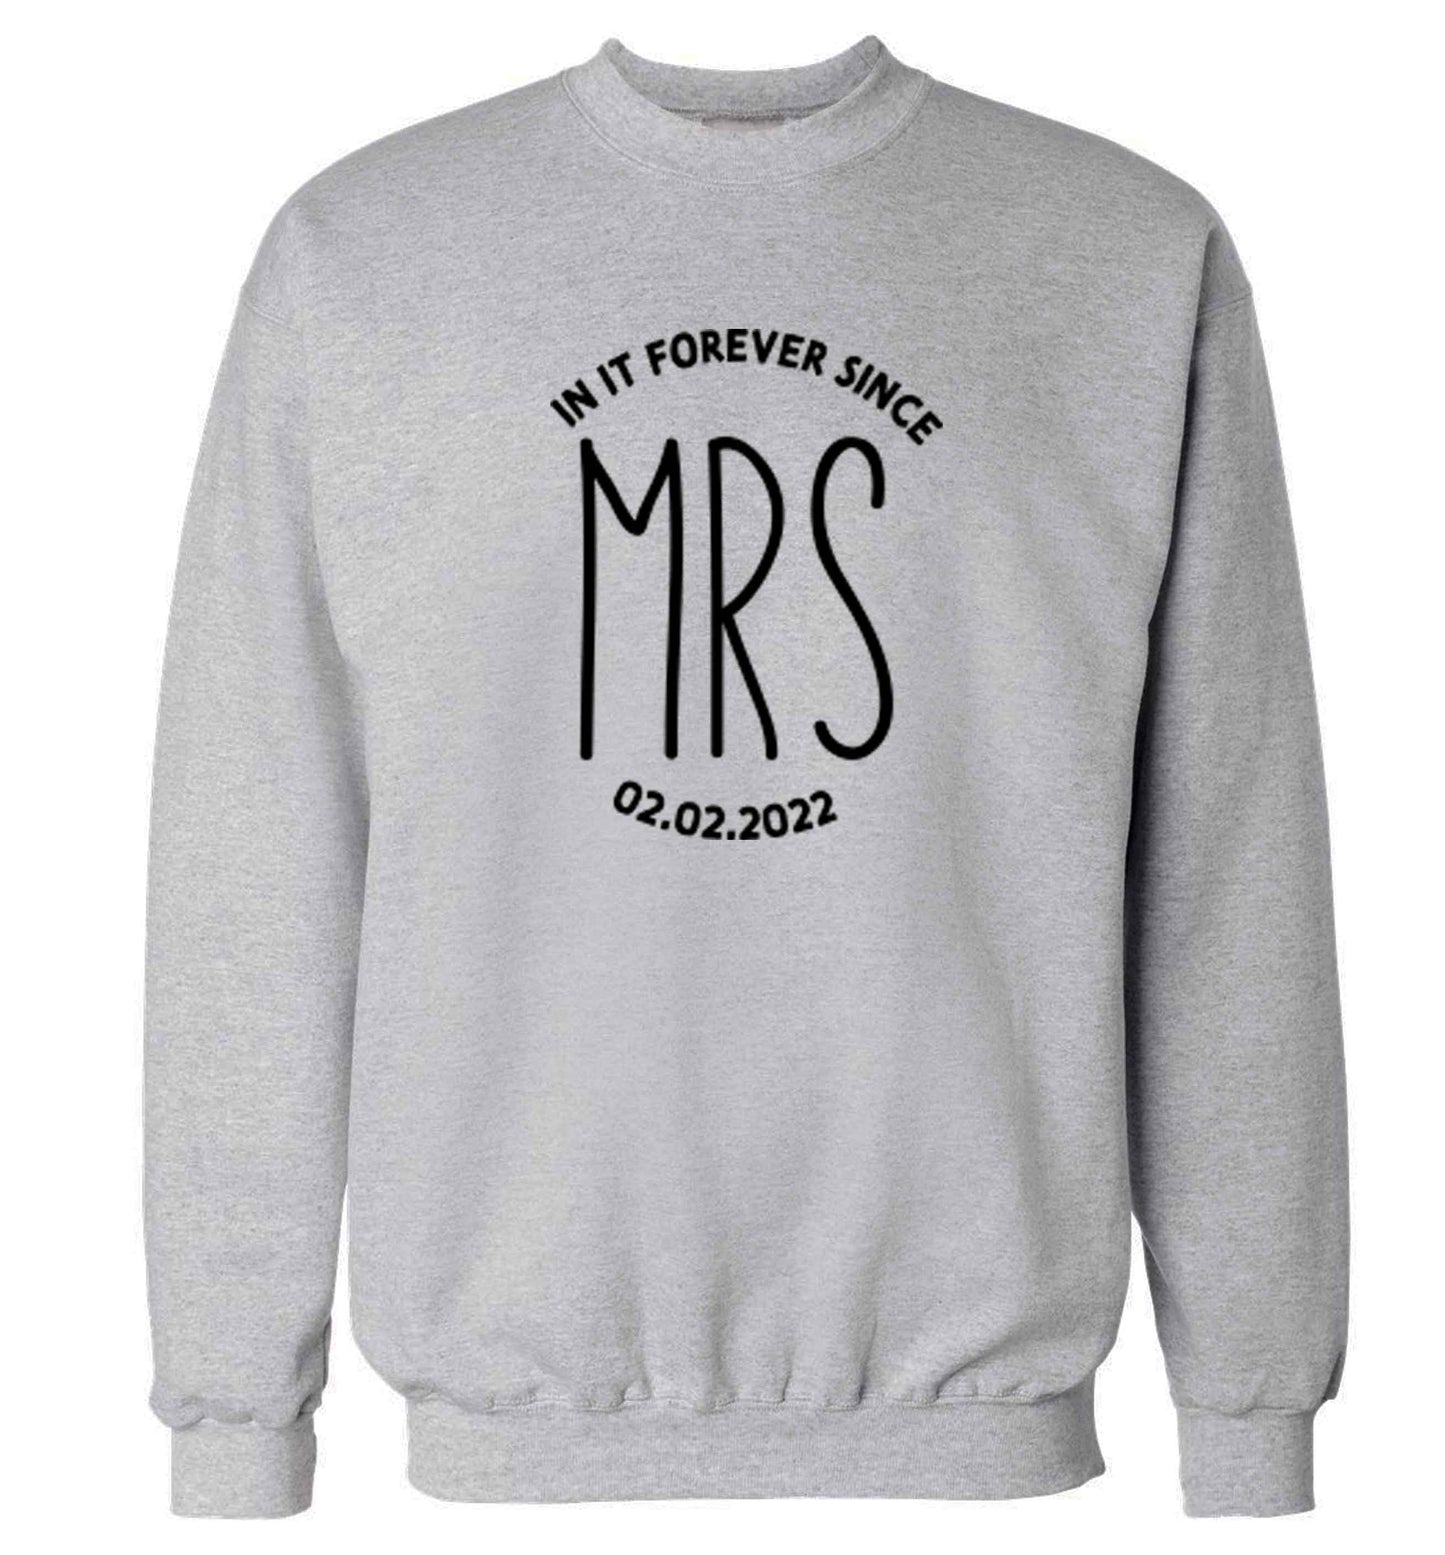 Funny matching gifts for him and her! Get matchy matchy, ideal for newlywed couples or a little valentines gift! adult's unisex grey sweater 2XL